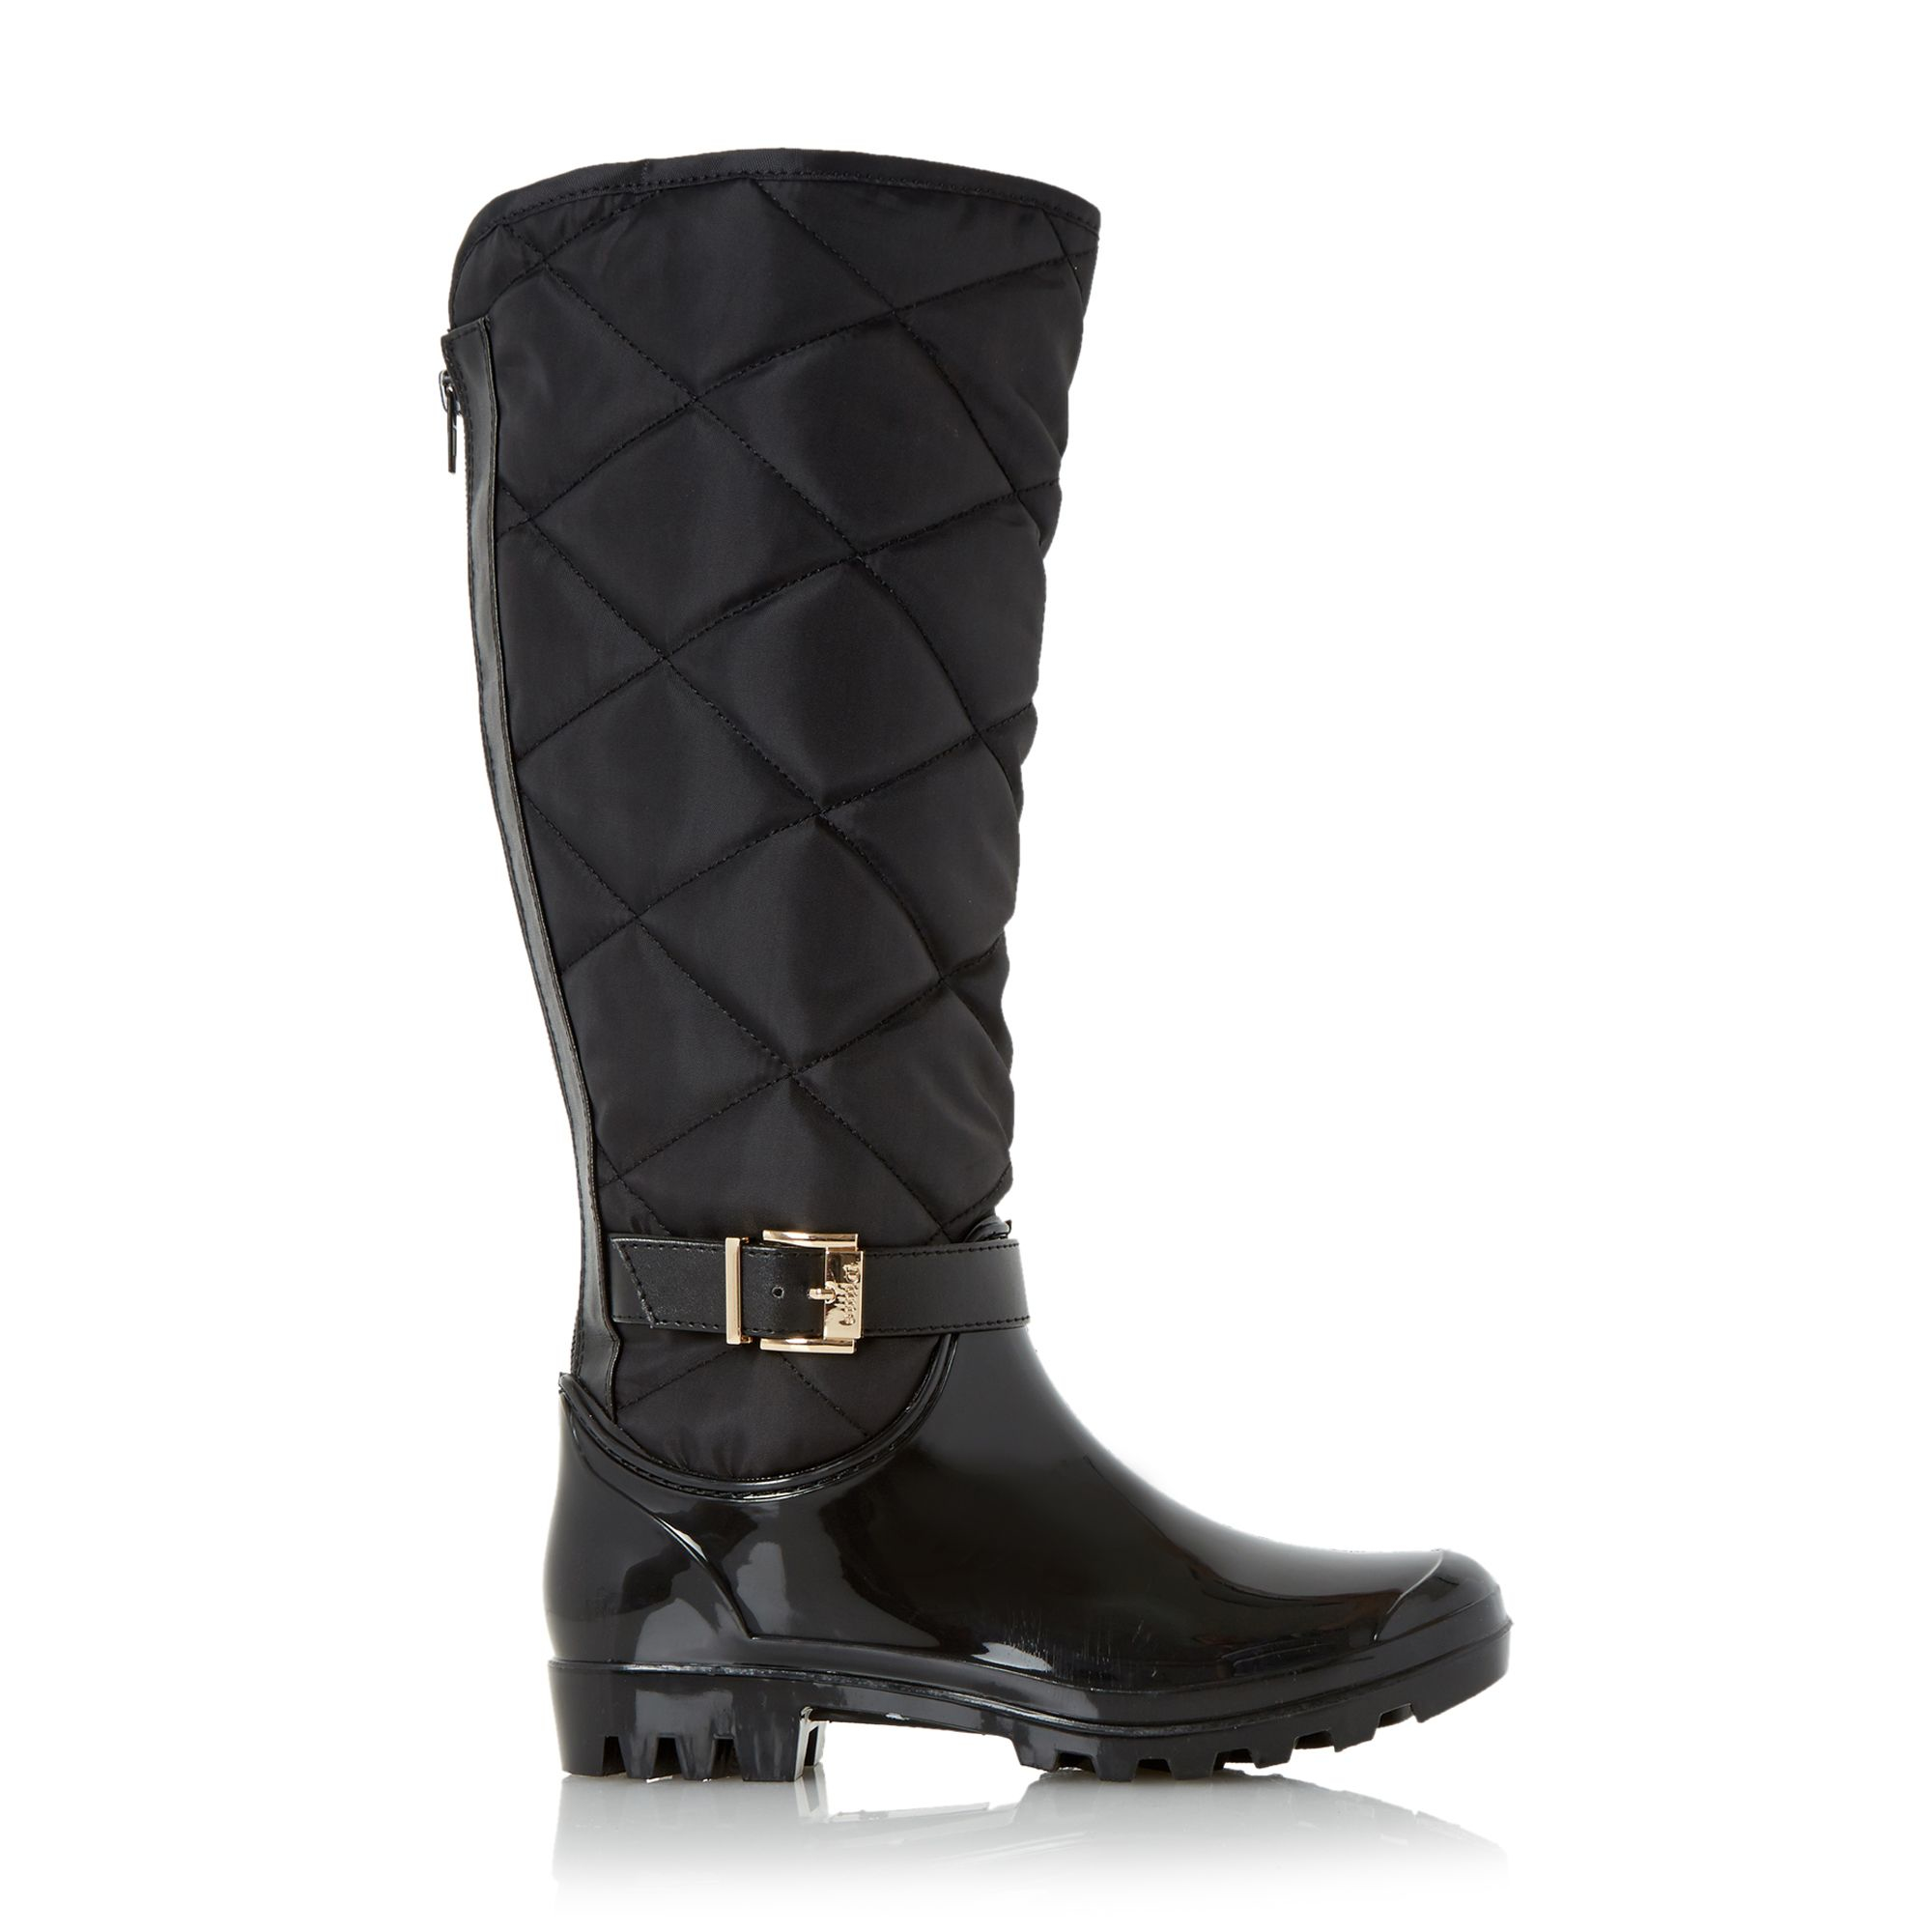 quilted wellington boots